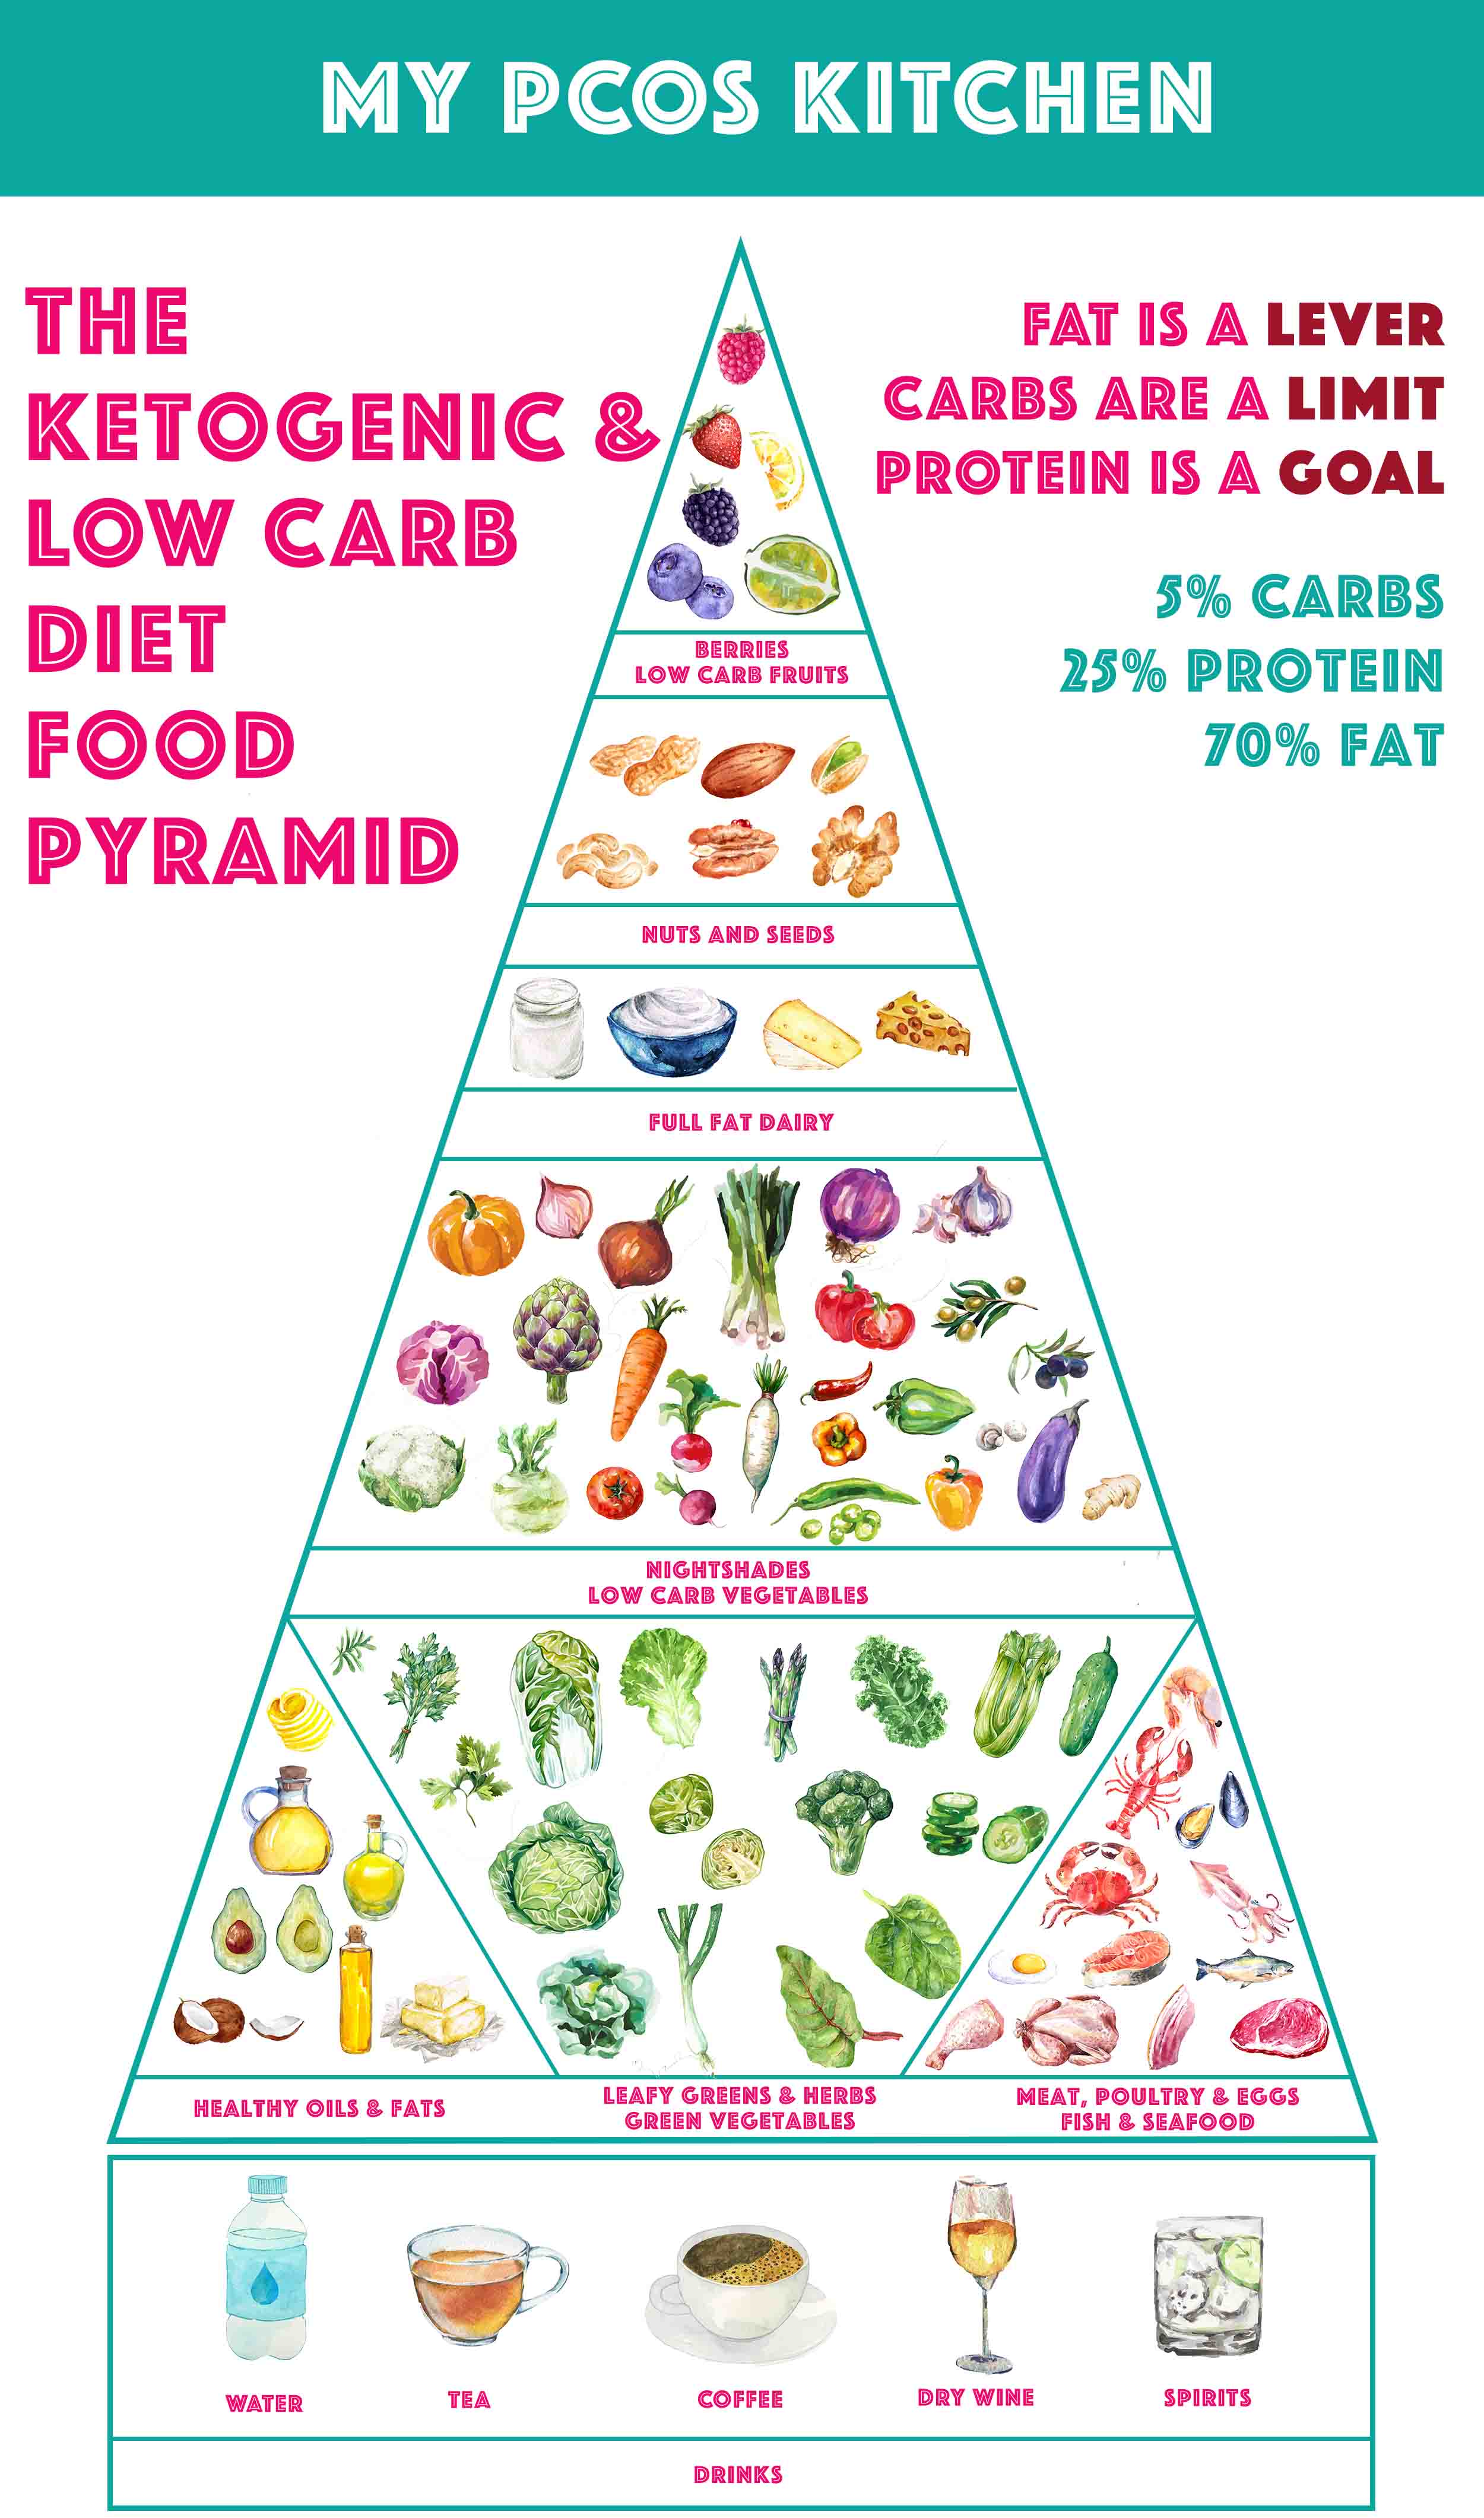 Image showing the keto food pyramic with healthy low carb vegetables, protein and fats.